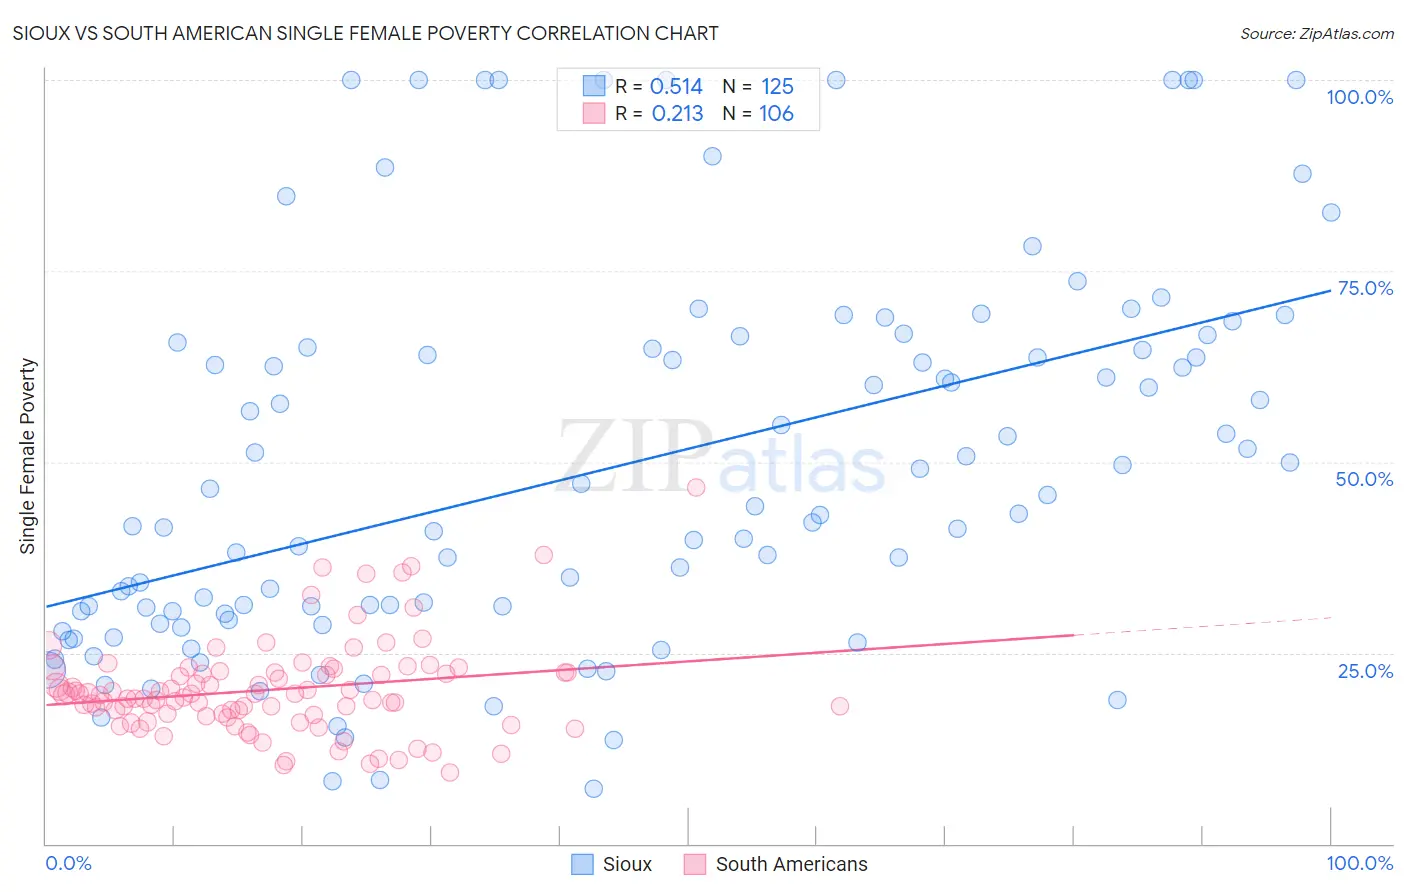 Sioux vs South American Single Female Poverty